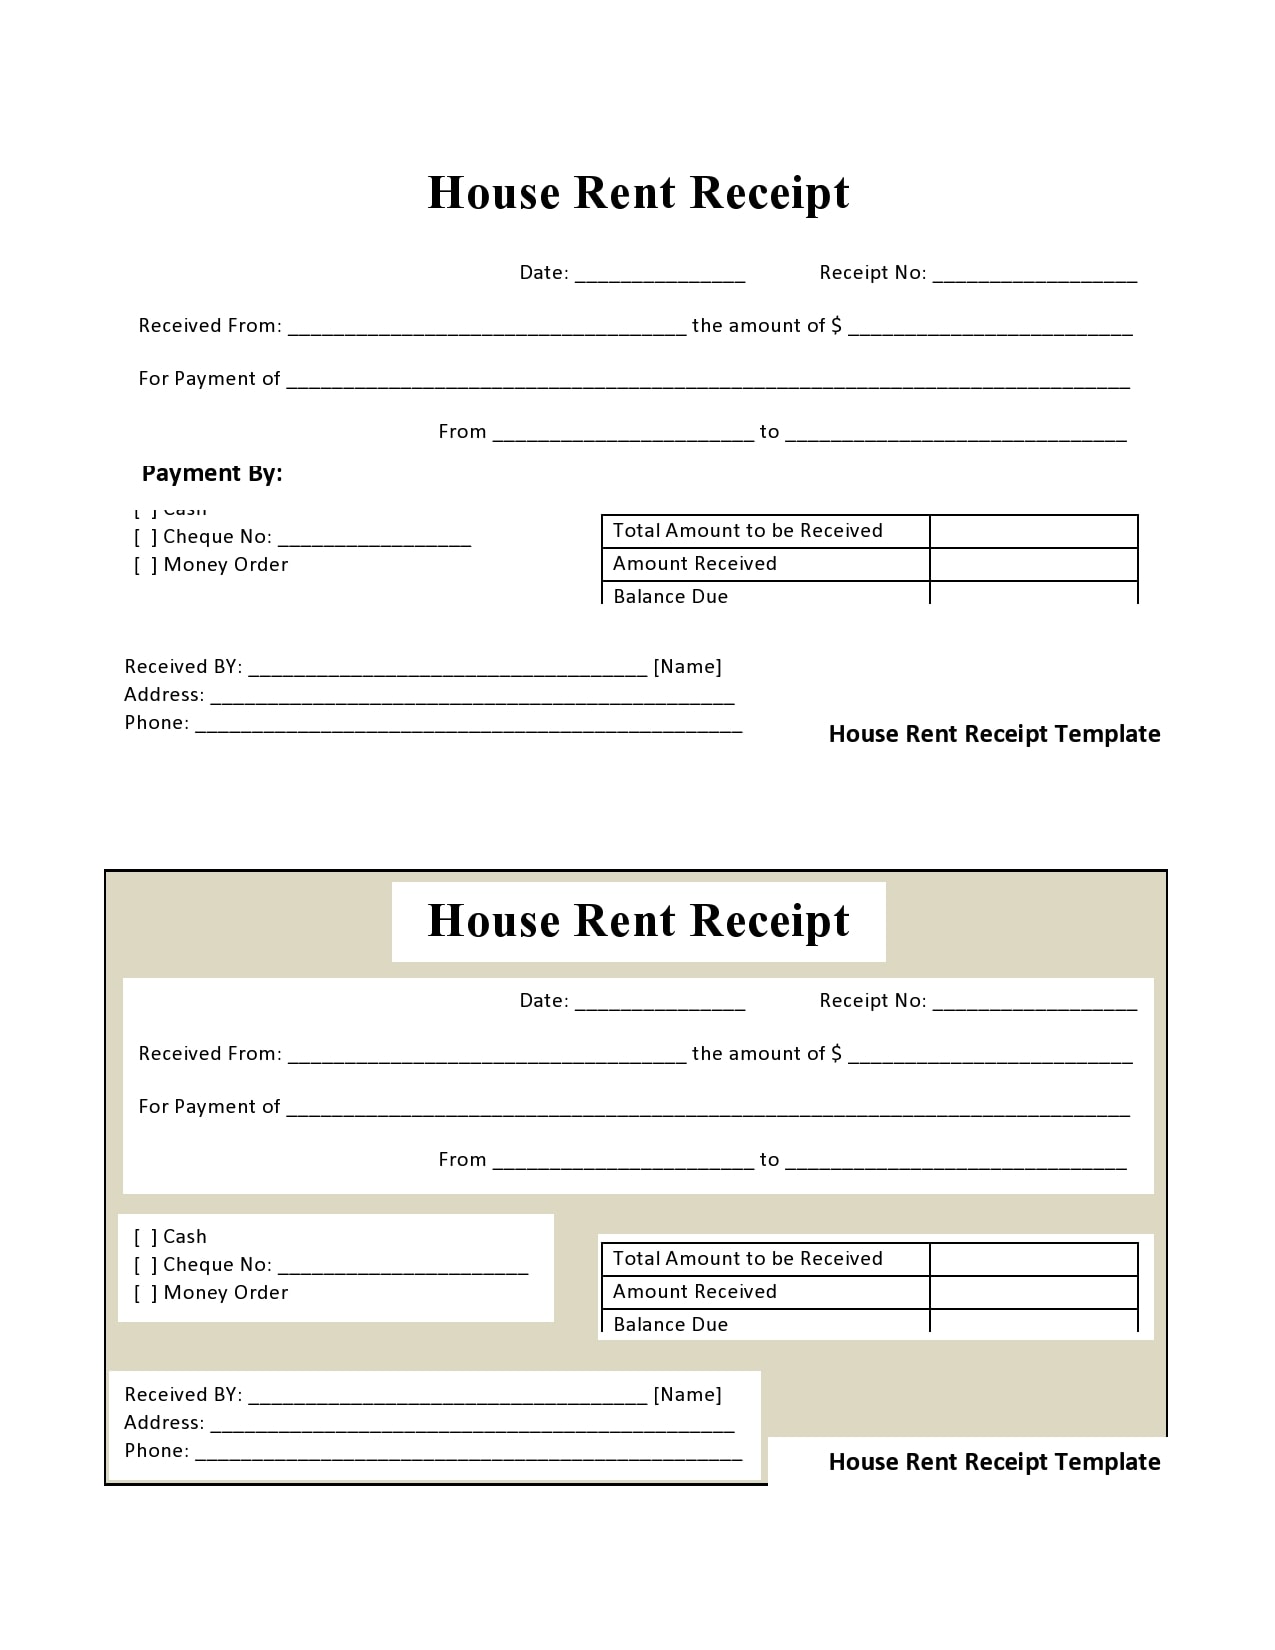 format for house rent receipt